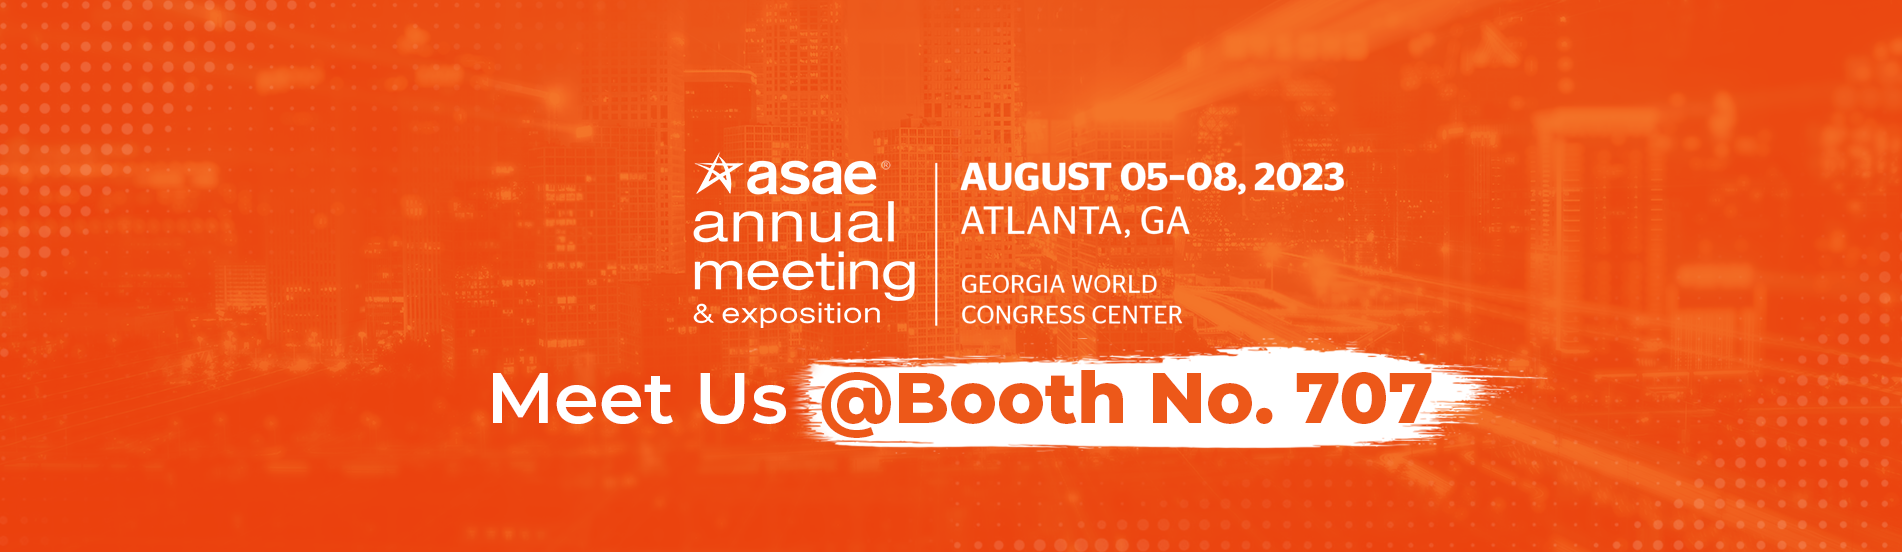 Join us at ASAE Annual Meeting & Exposition | August 05-08, 2023